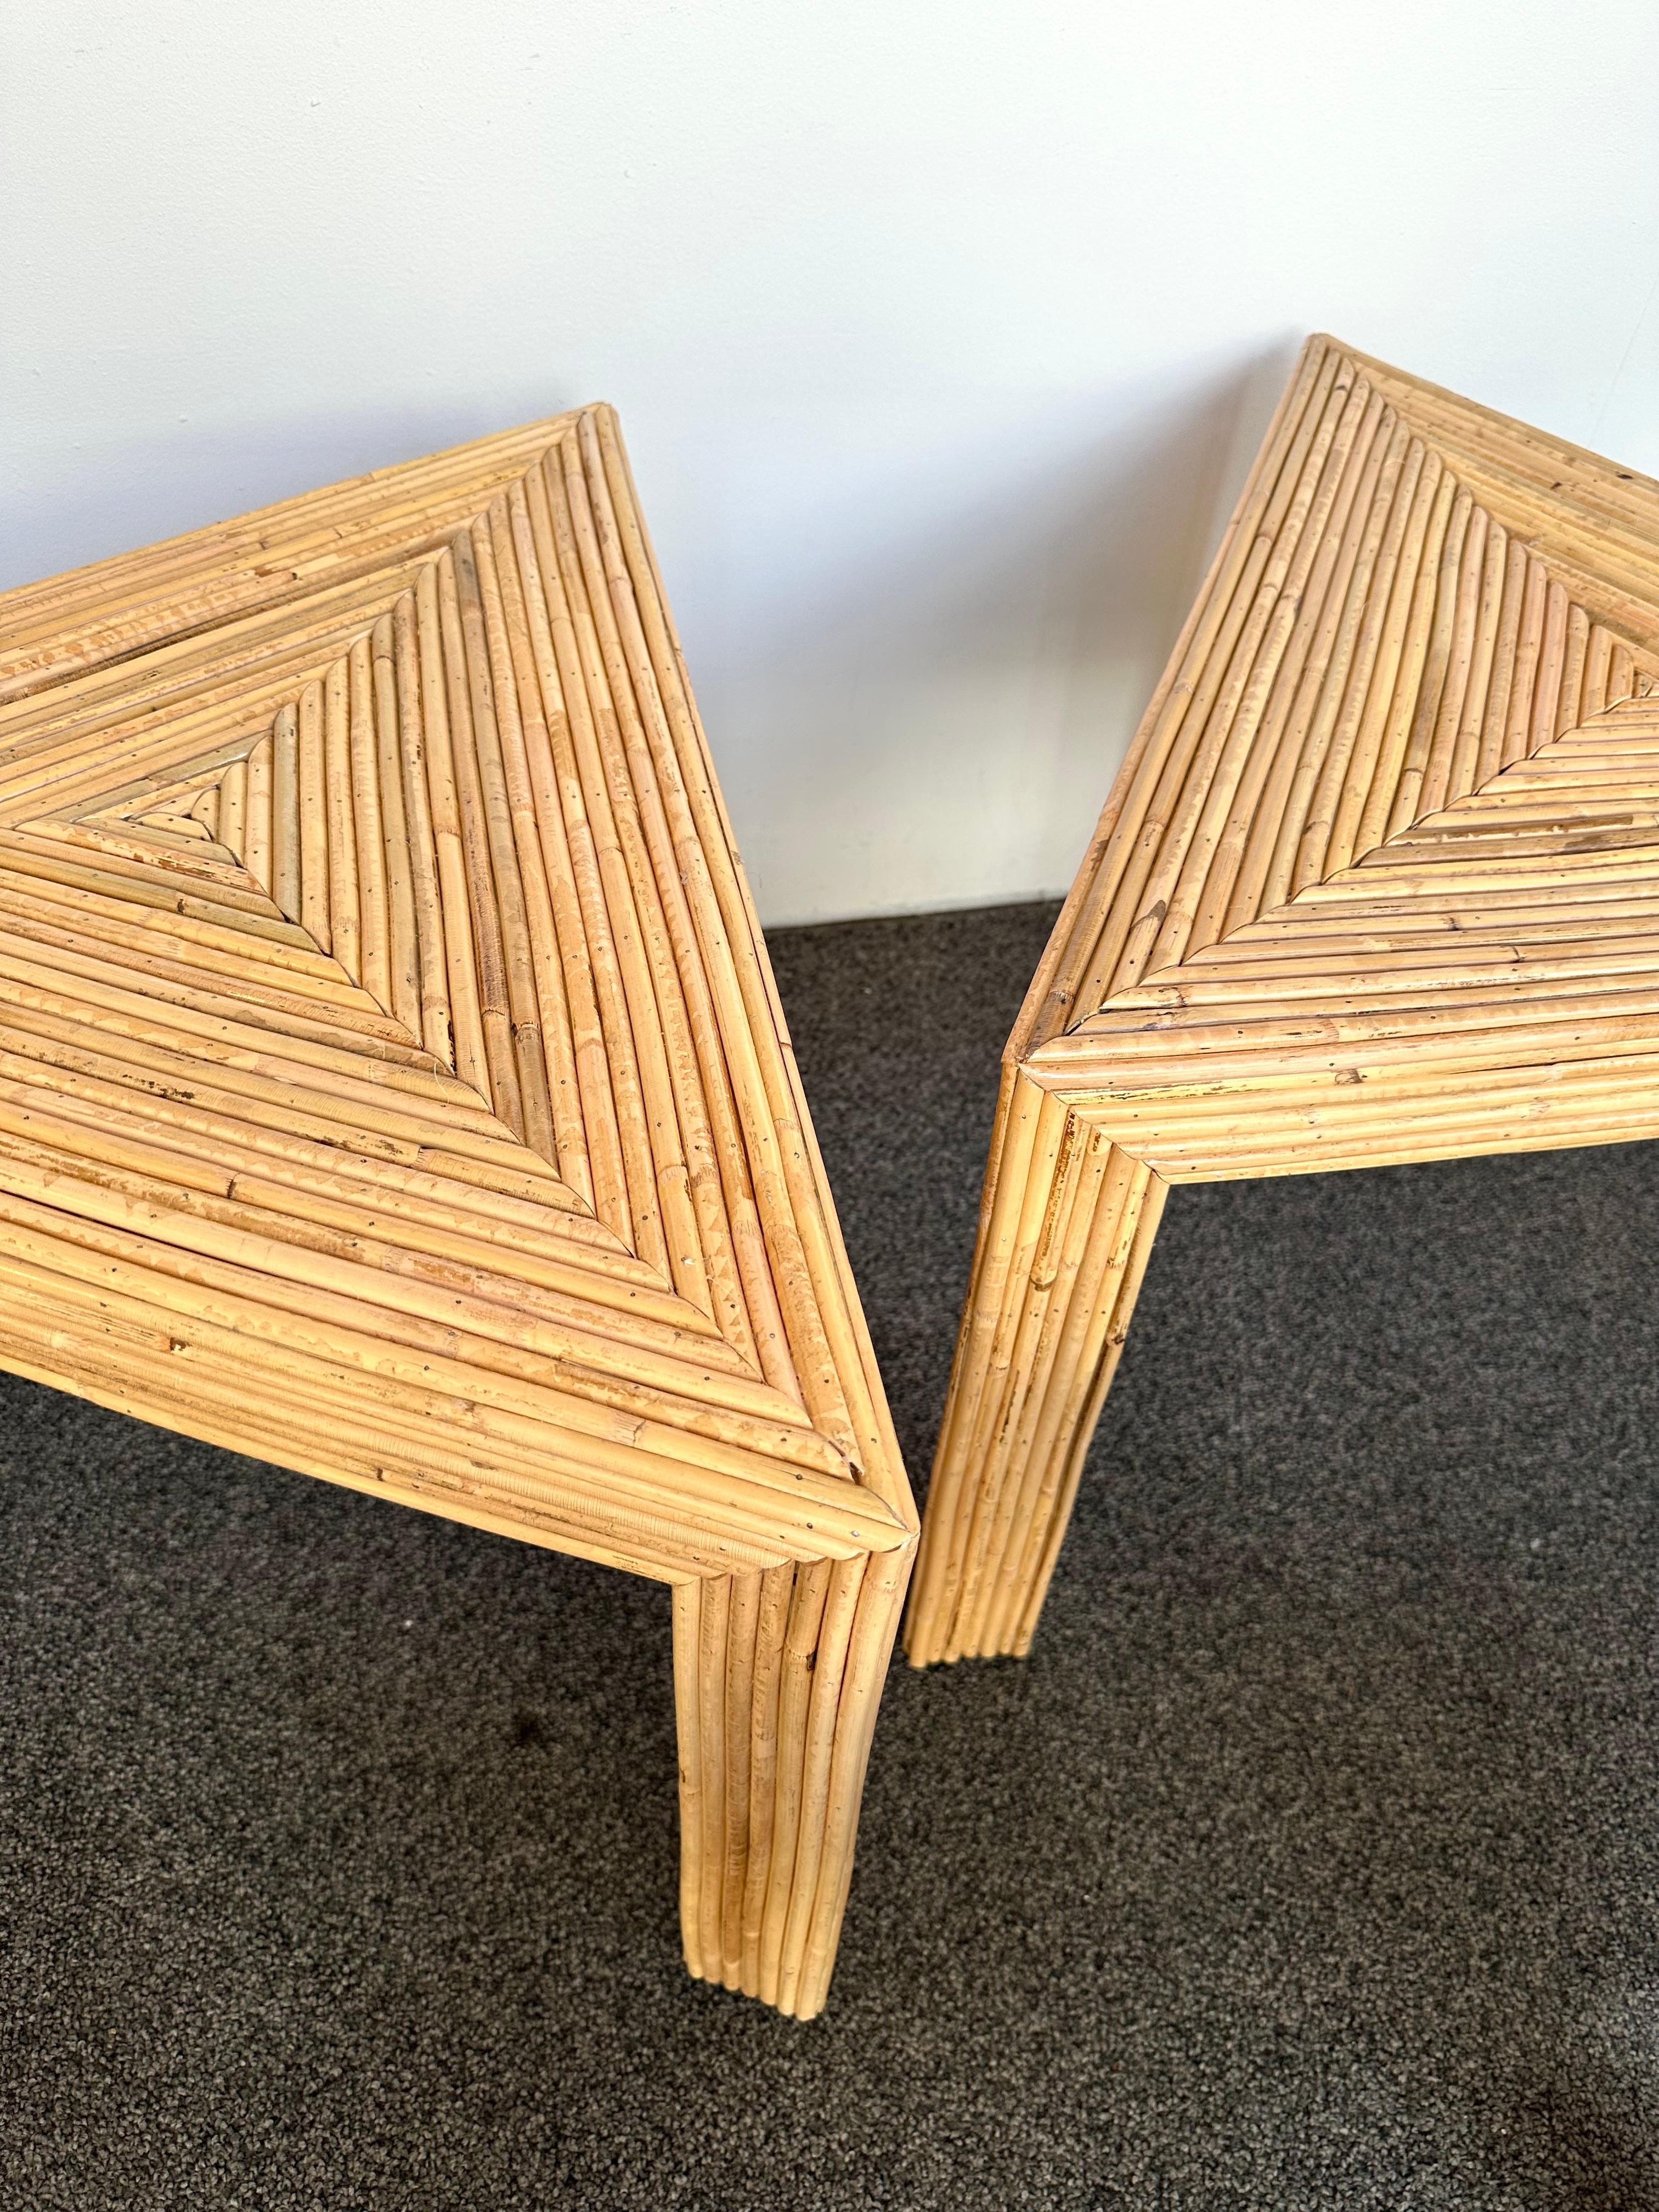 Mid-Century Modern Set of 3 Rattan Tables by Vivai Del Sud. Italy, 1970s